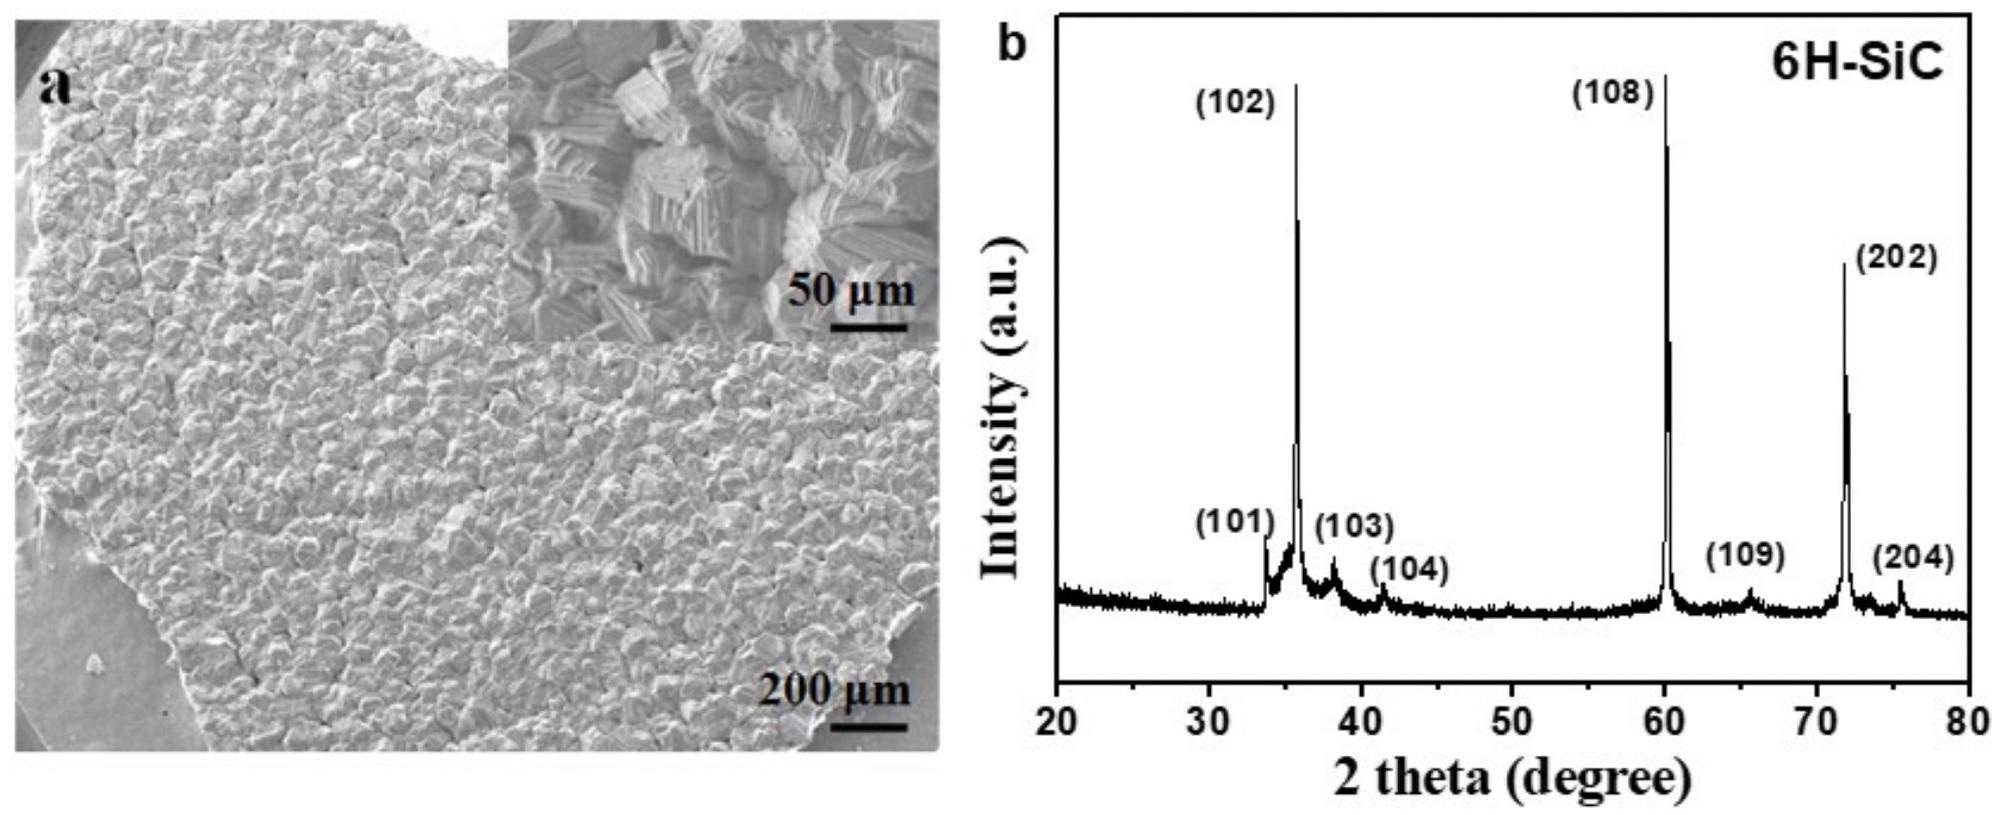 (a) SEMimages and (b) XRD pattern of the deposited SiC product on the graphite crucible cover.